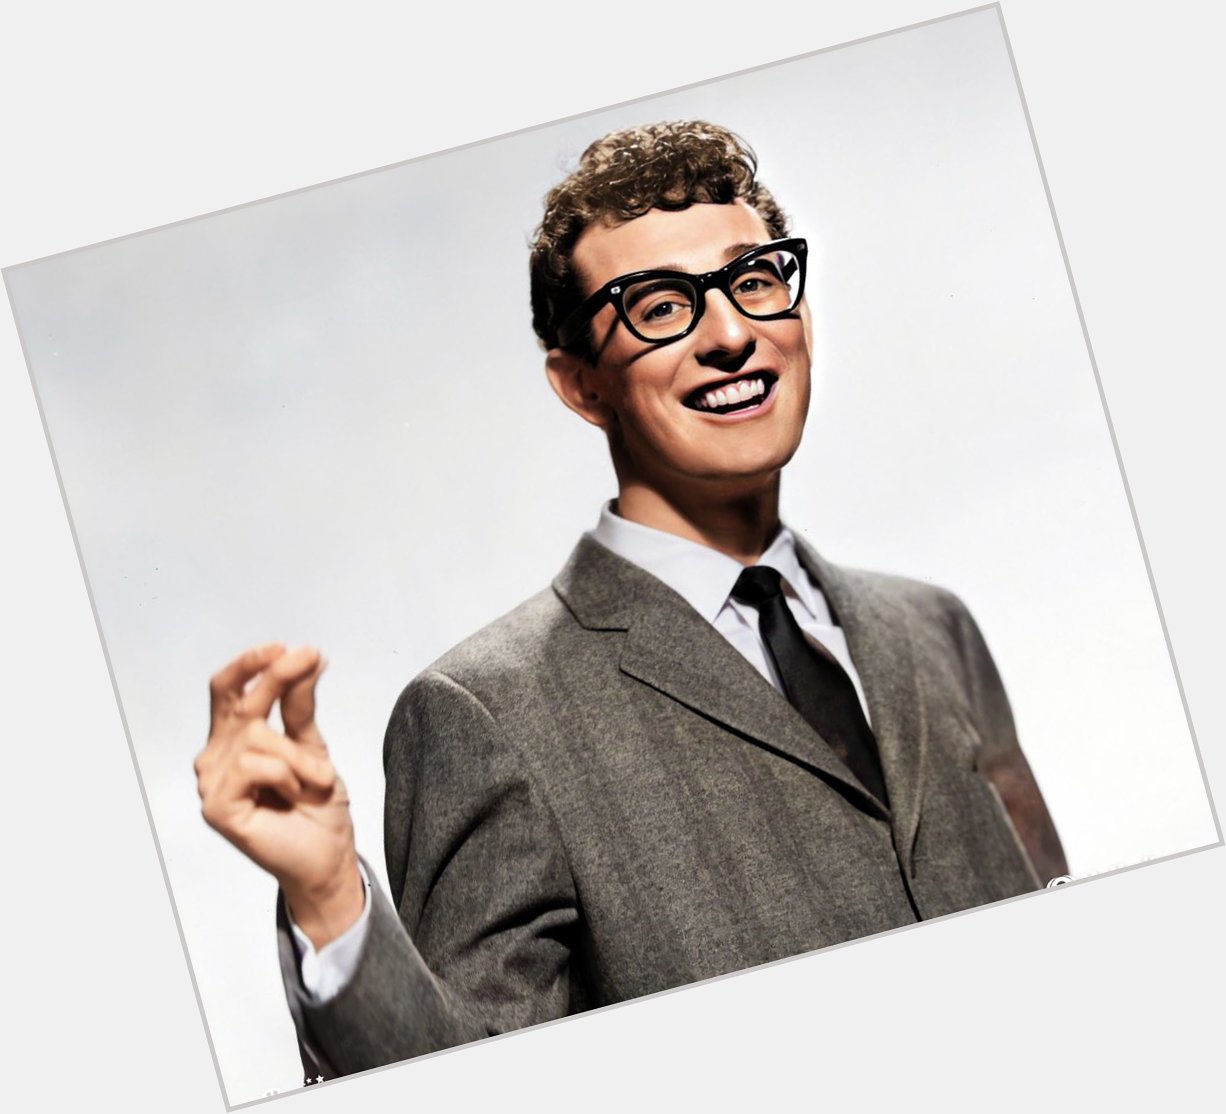 Happy birthday to one of the most influential figures in music history- the legend, Buddy Holly. 